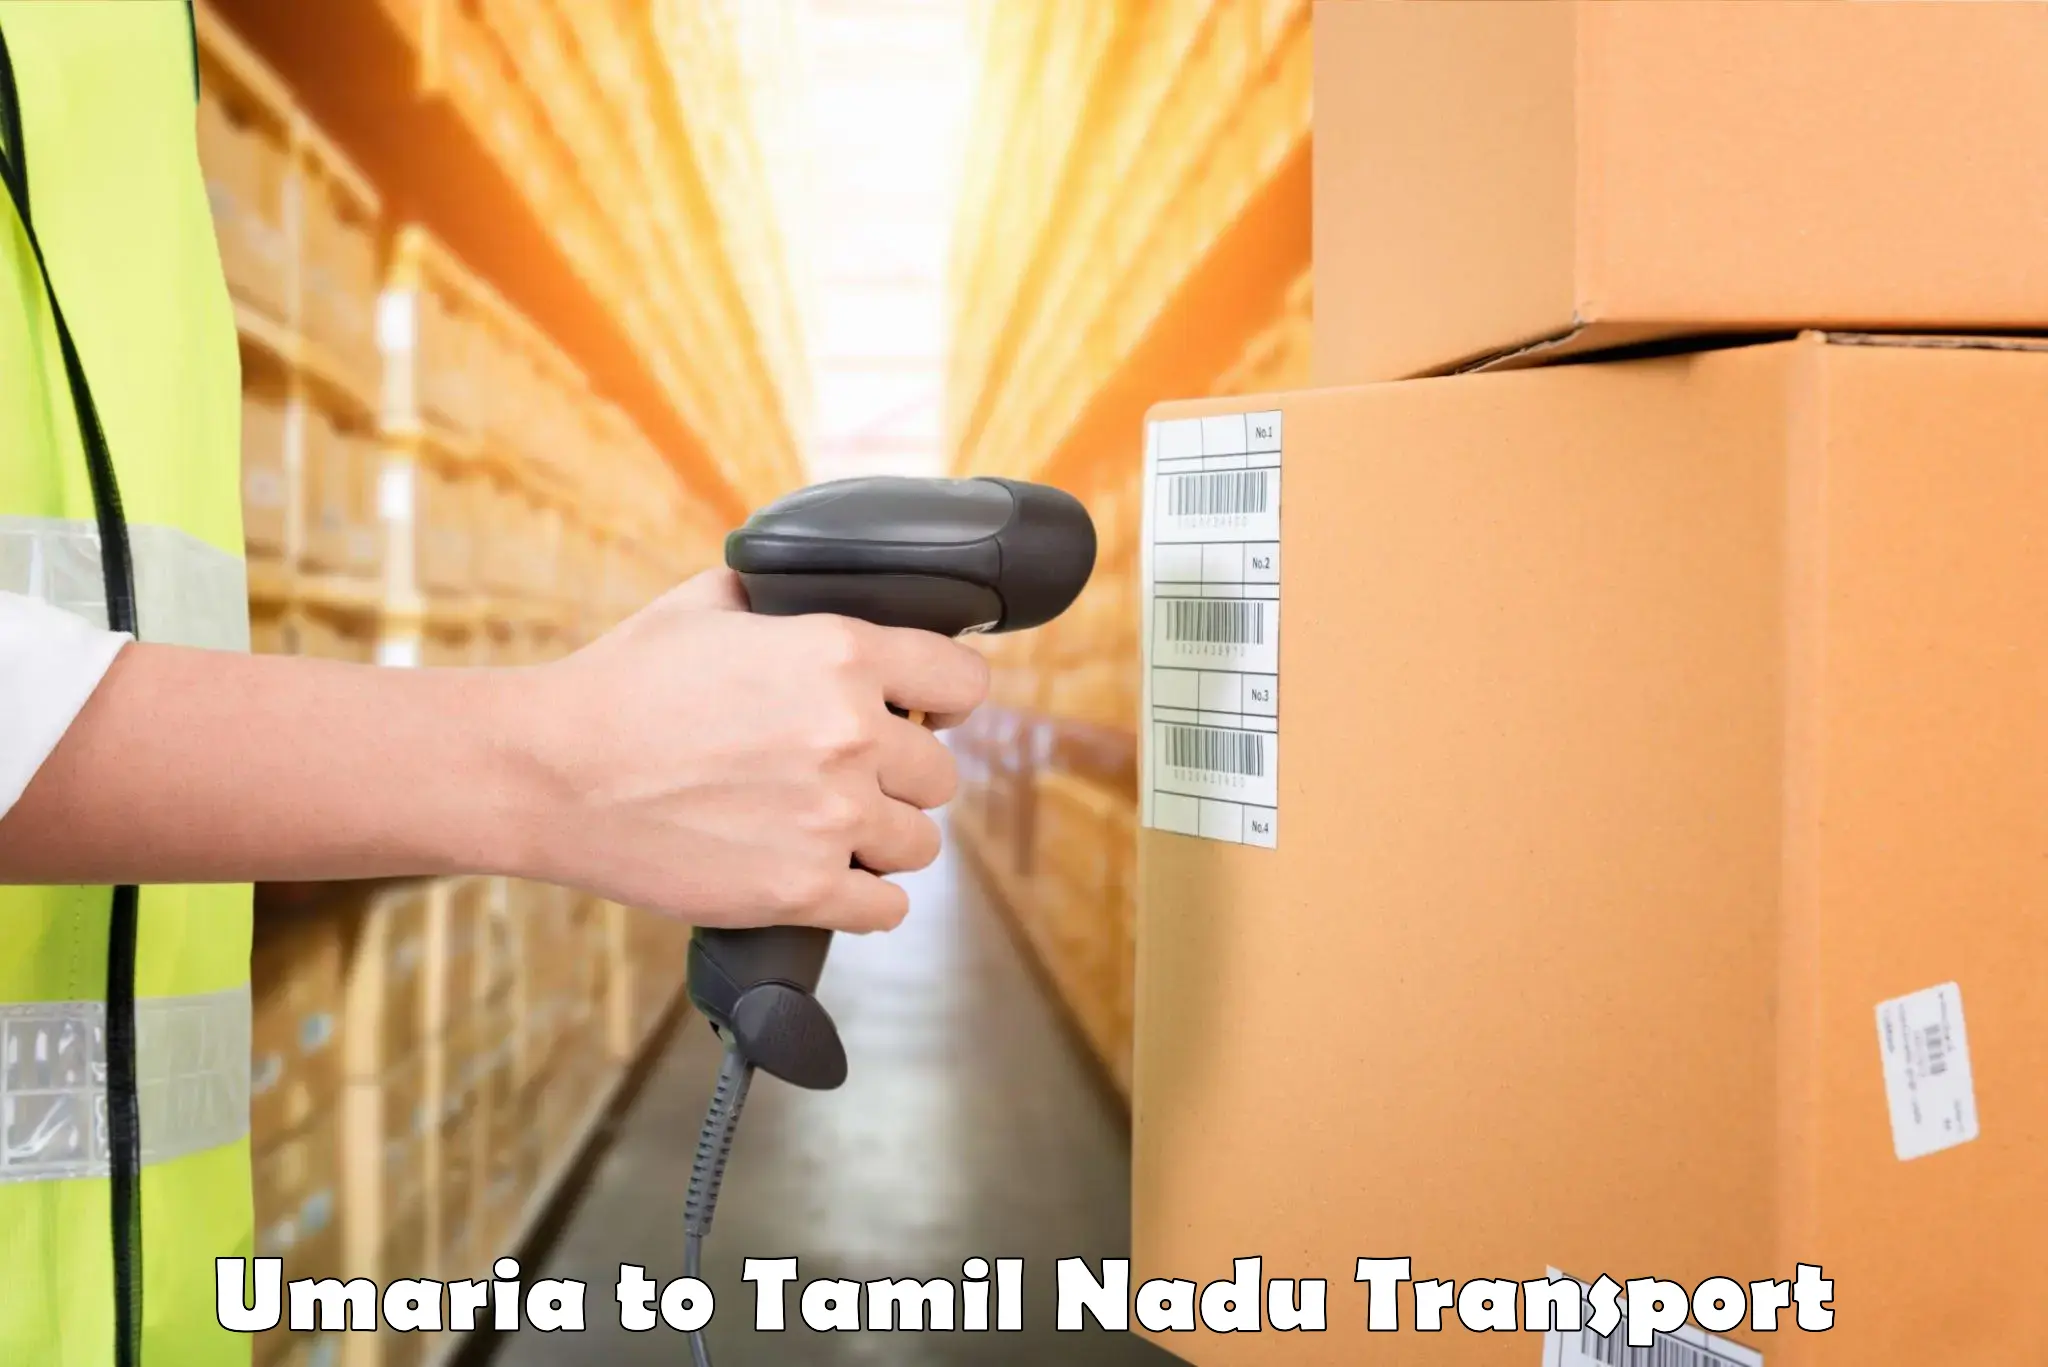 Domestic goods transportation services Umaria to Nagercoil